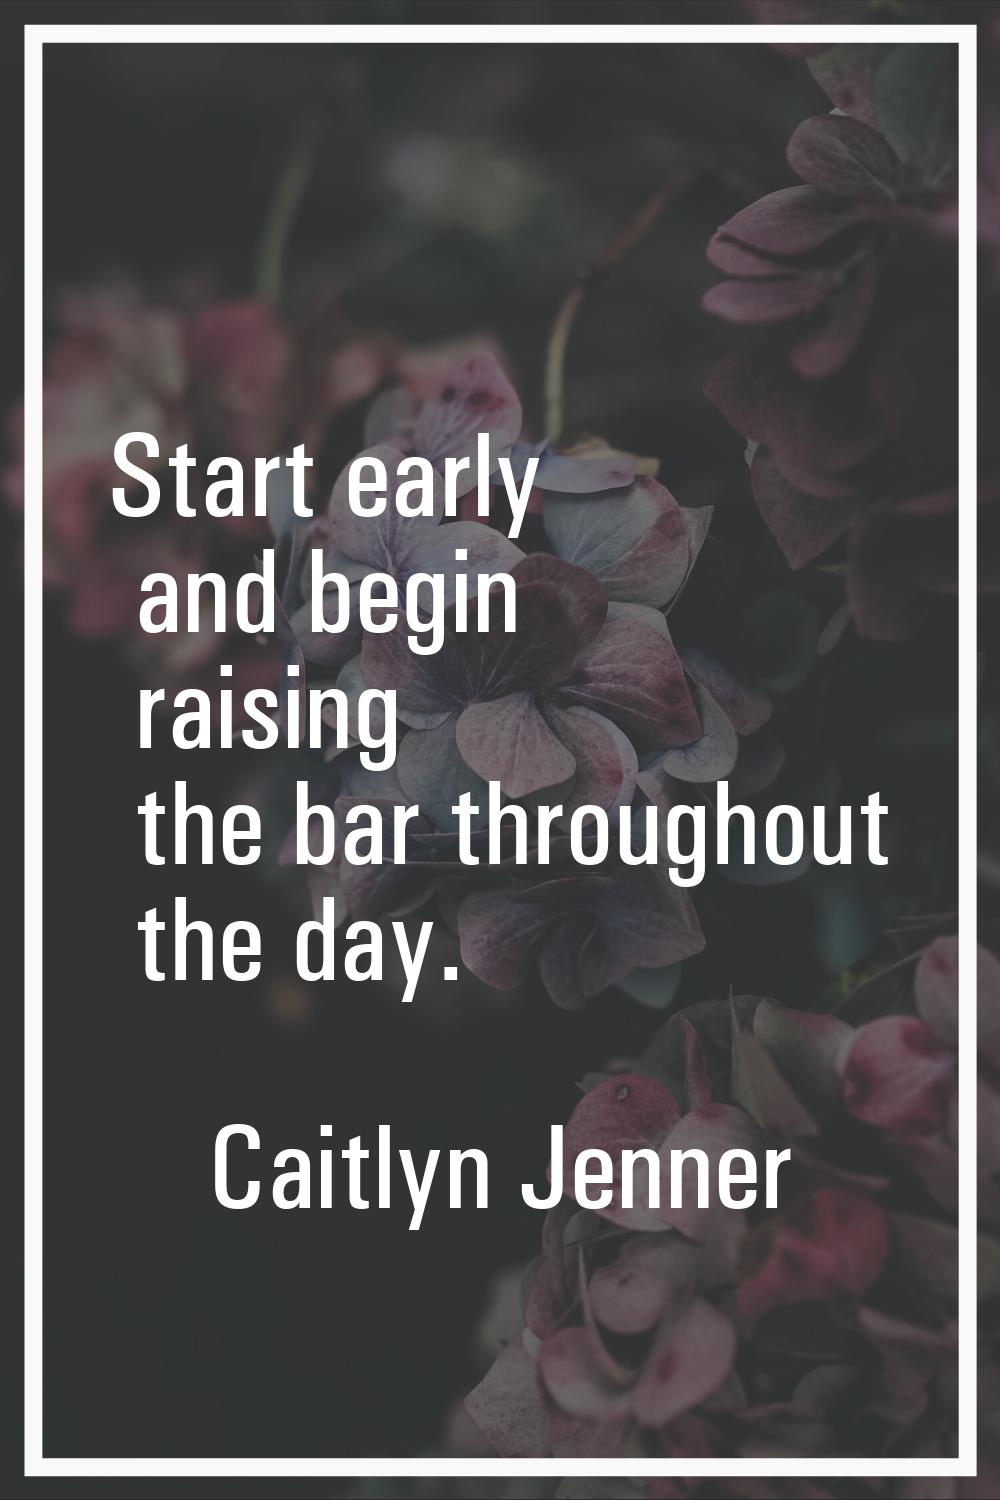 Start early and begin raising the bar throughout the day.